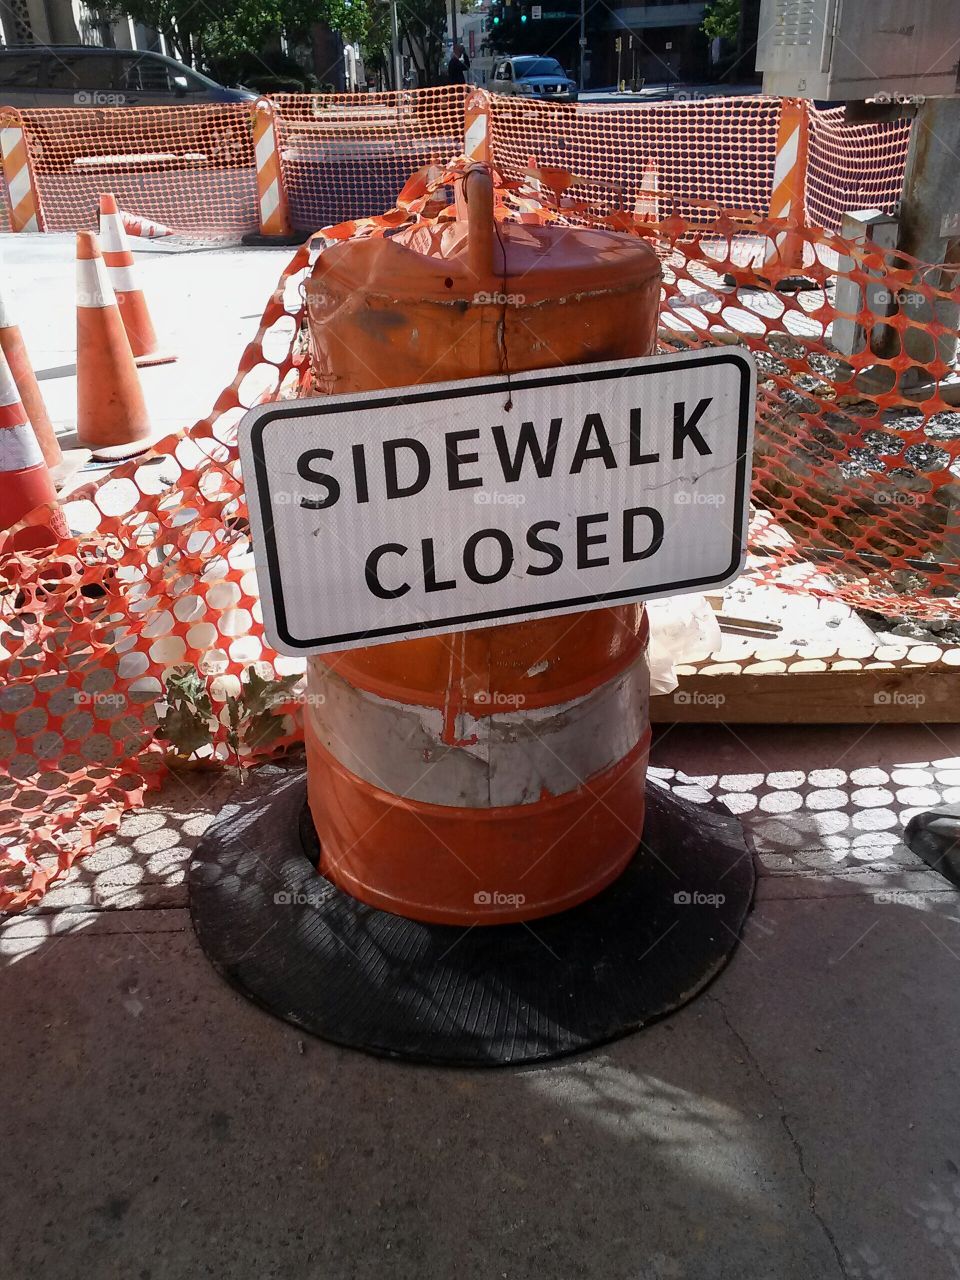 Sidewalk Closed in the city